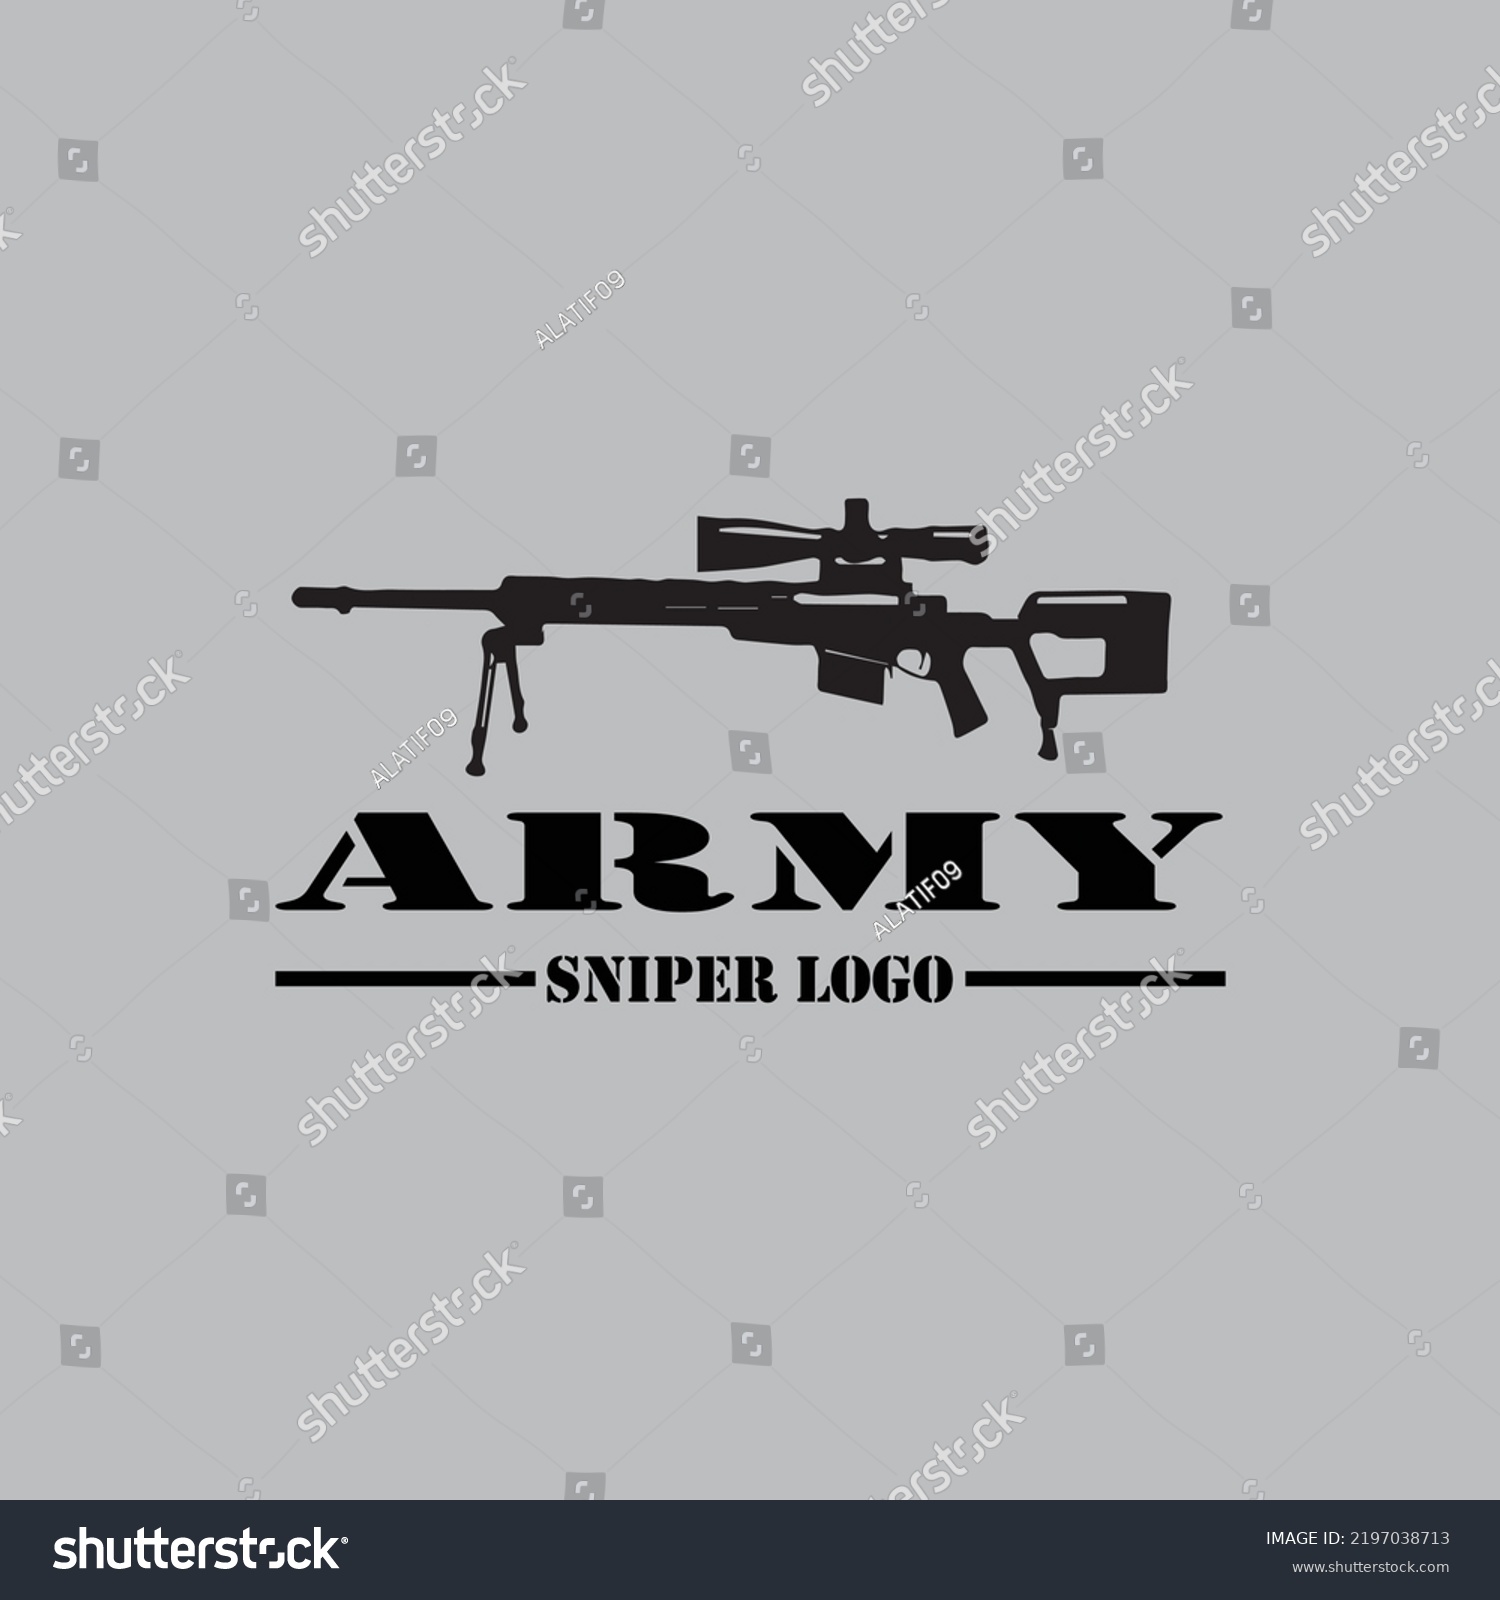 Sniper Army Logo Design Template Vintage Stock Vector (Royalty Free ...